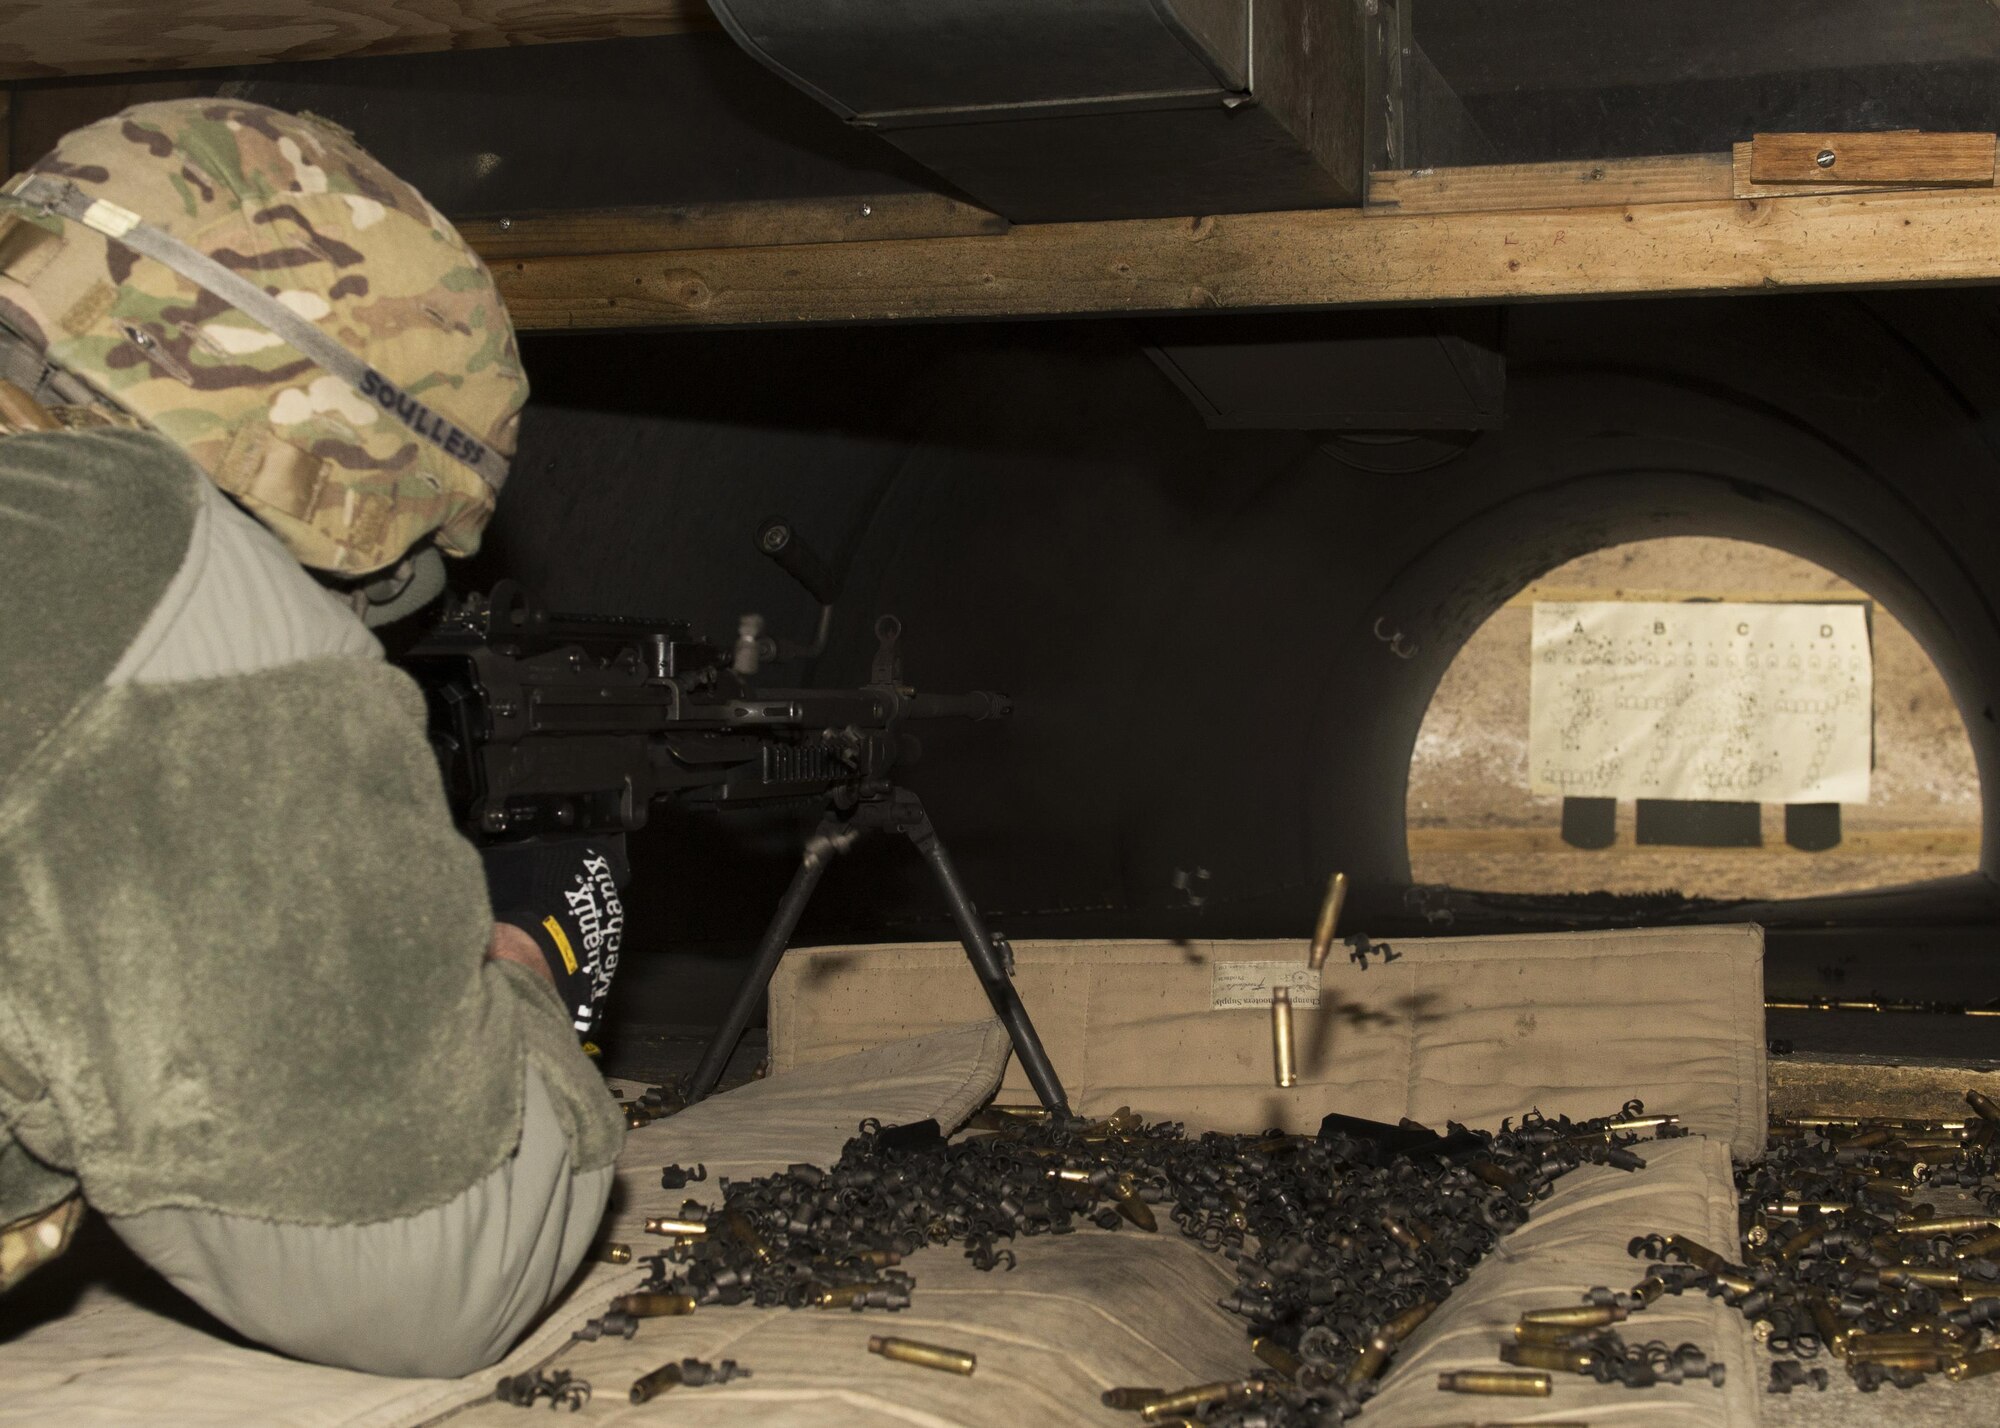 A 5th Security Forces Squadron combat arms training and maintenance student fires an M249 light machine gun at the CATM site on Minot Air Force Base, N.D., Feb. 1, 2017. CATM instructors work with each student as they learn how to properly use this firearm to ensure the safety of the student and those around them. (U.S. Air Force photo/Airman 1st Class Alyssa M. Akers)